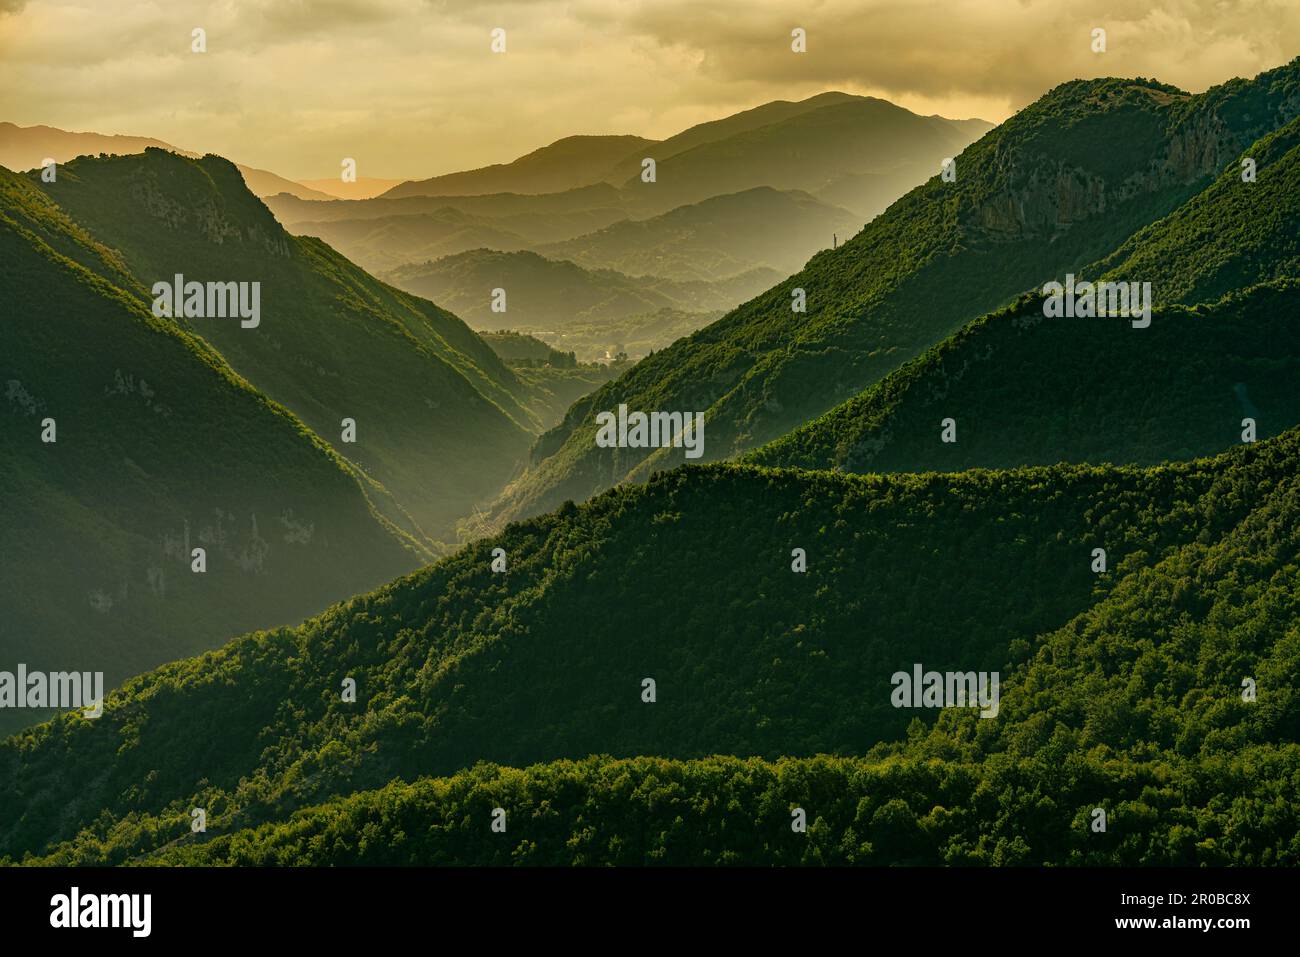 Last warm lights of the sunset on the mountains of the Aniene valley, in the background the peaks of the Simbruini Mountains. Lazio, Italy, Europe Stock Photo